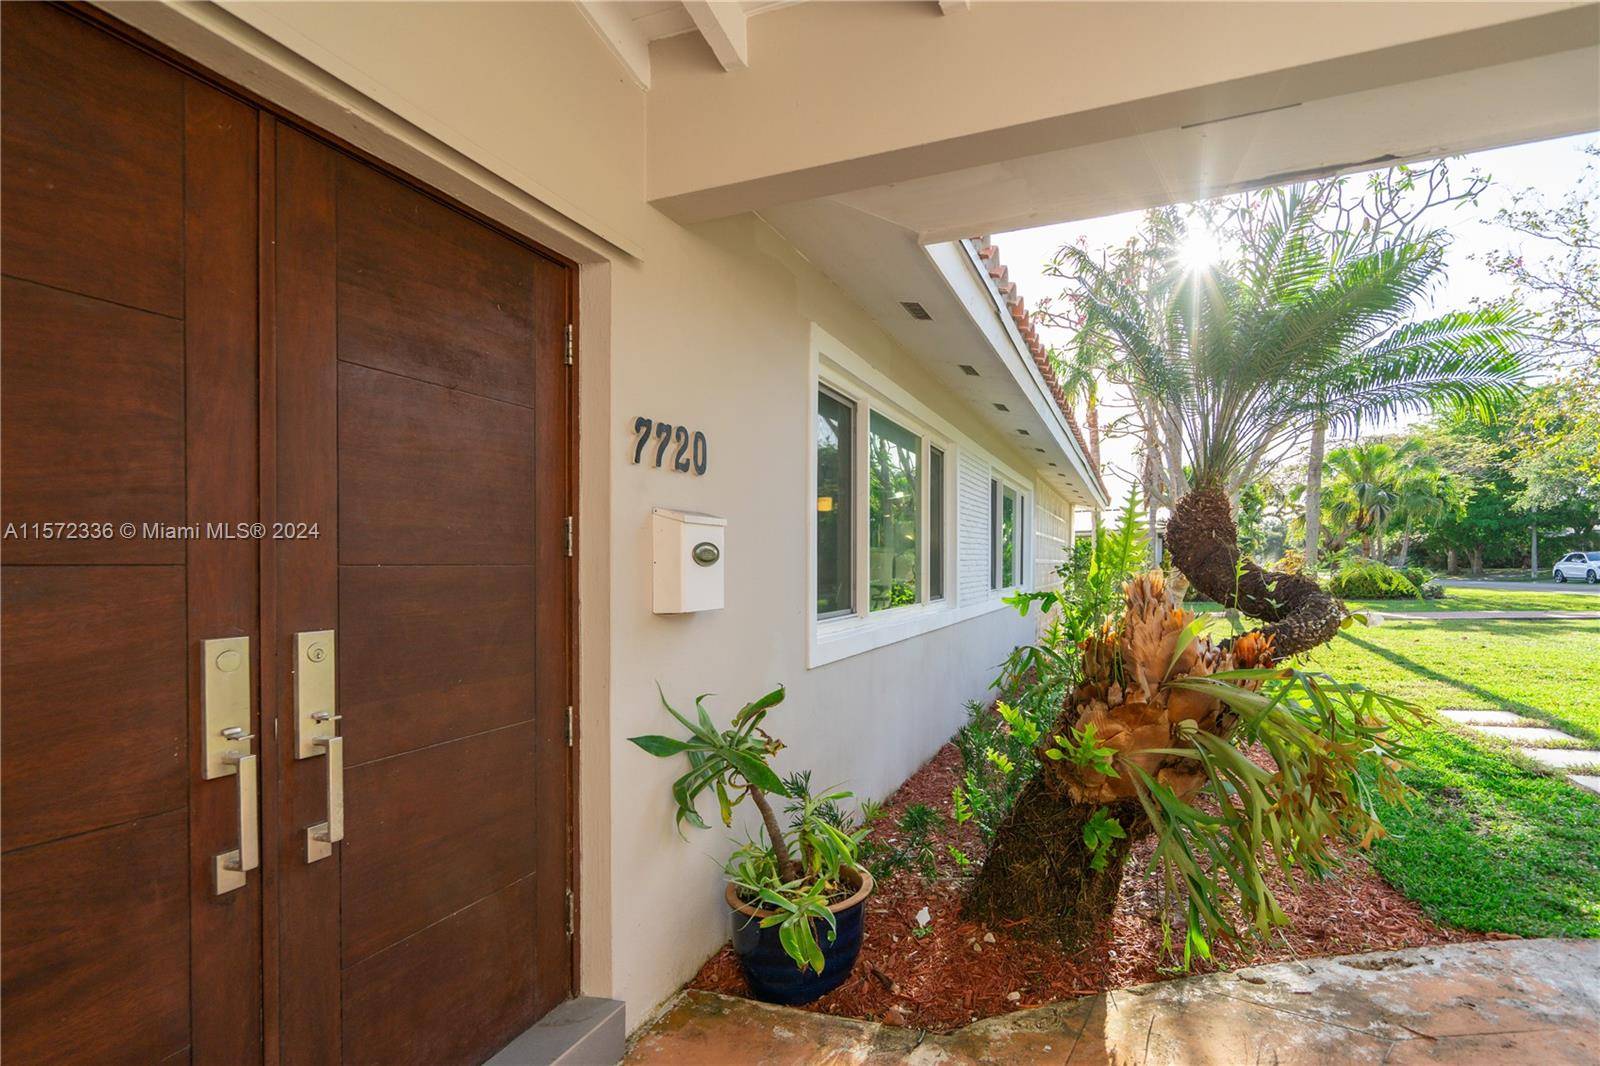 Luxury living in Palmetto Bay with this stunning 3 bedroom, 3 bathroom Estate Home.